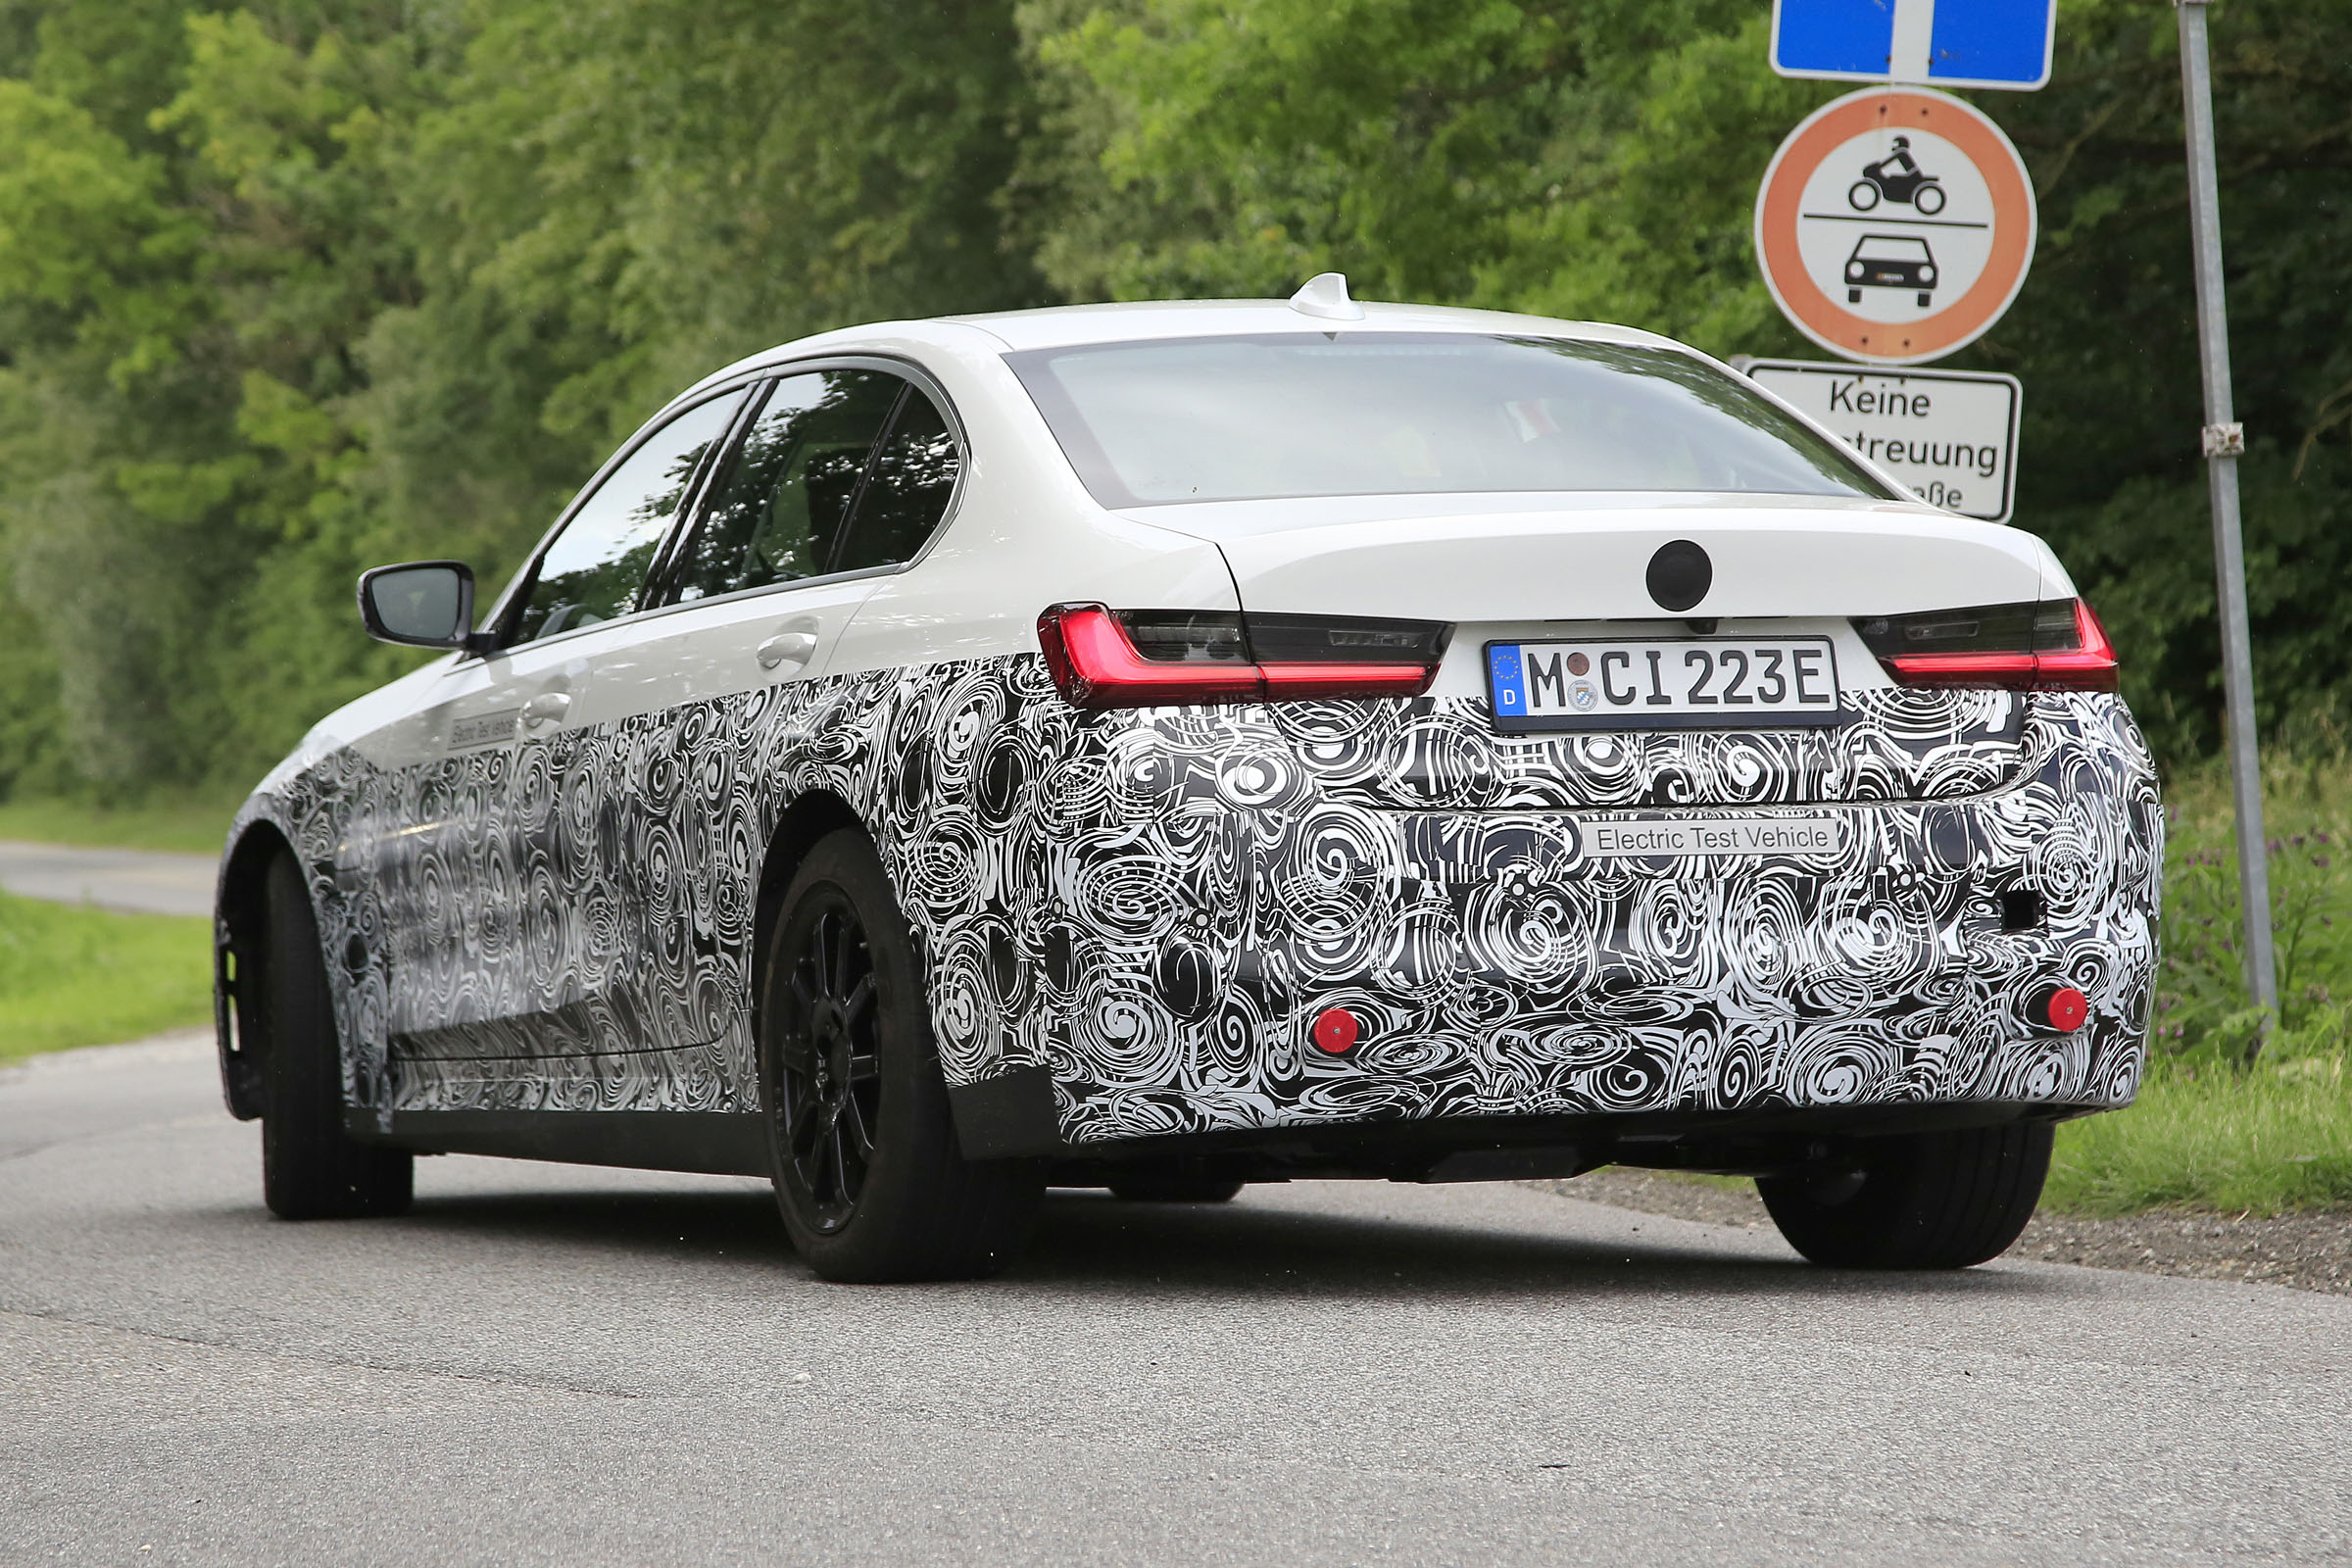 BMW 3 Series electric details and pictures DrivingElectric